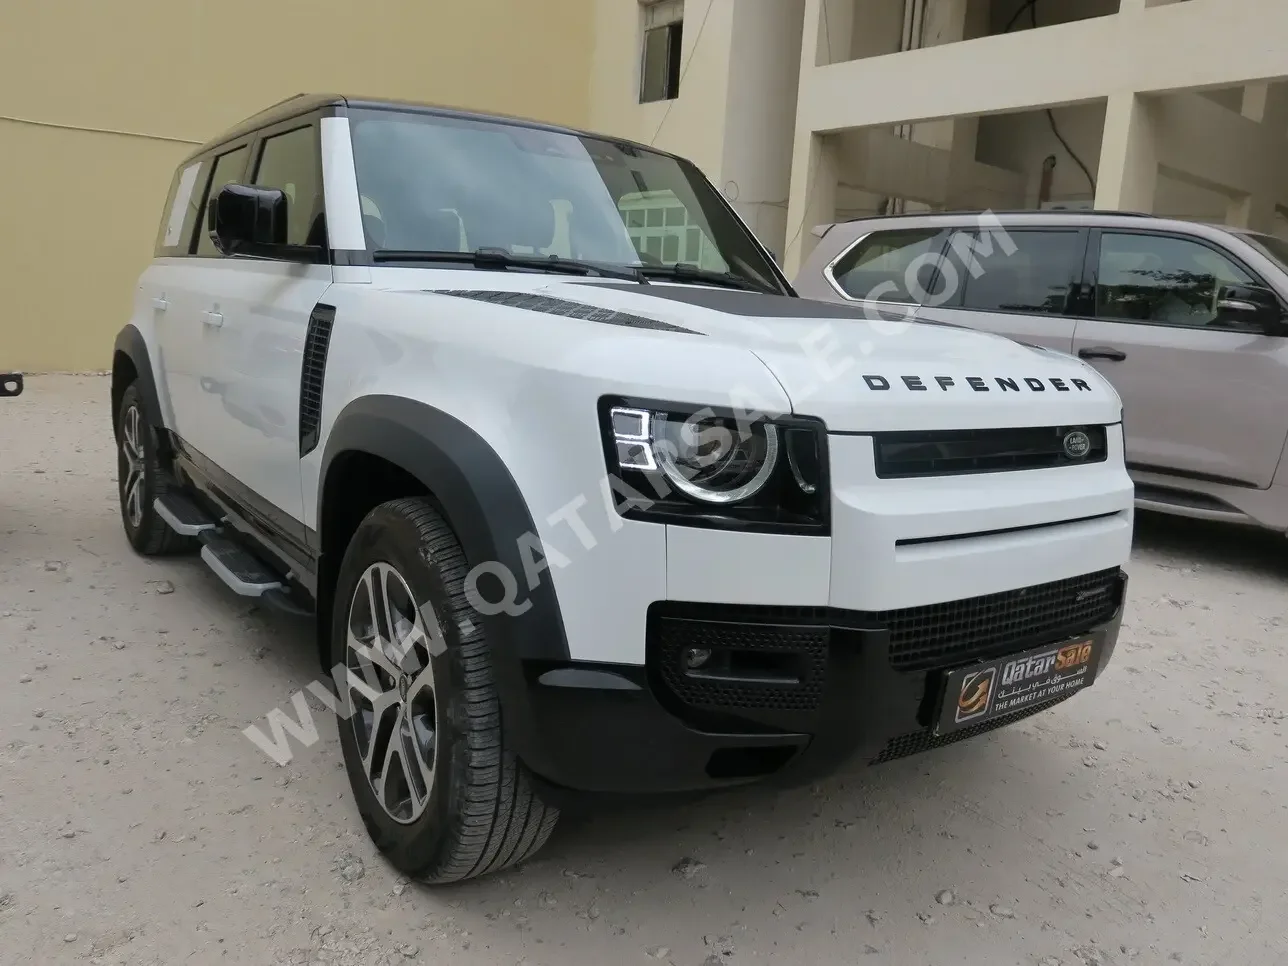 Land Rover  Defender  X Dynamic SE  2023  Automatic  18,400 Km  6 Cylinder  Four Wheel Drive (4WD)  SUV  White  With Warranty